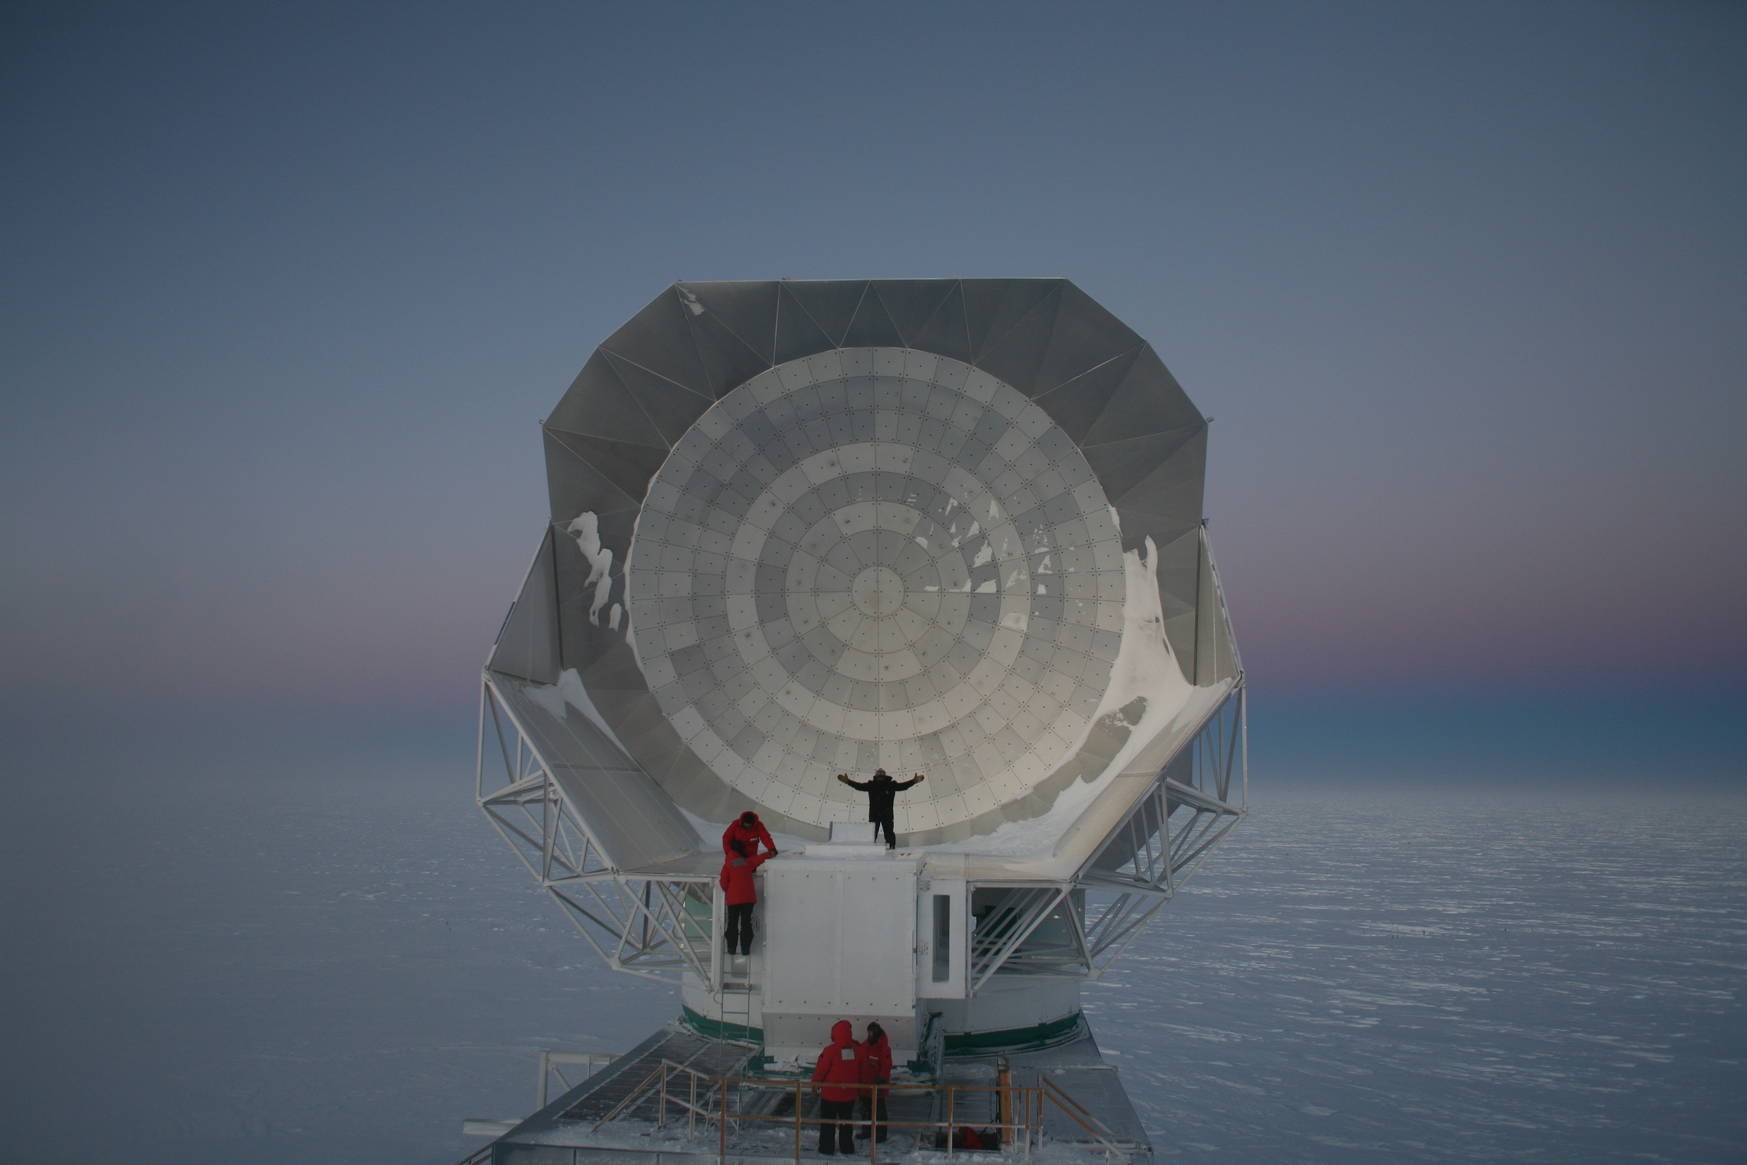 Visitors from station realizing just how large the south pole telescope really is.